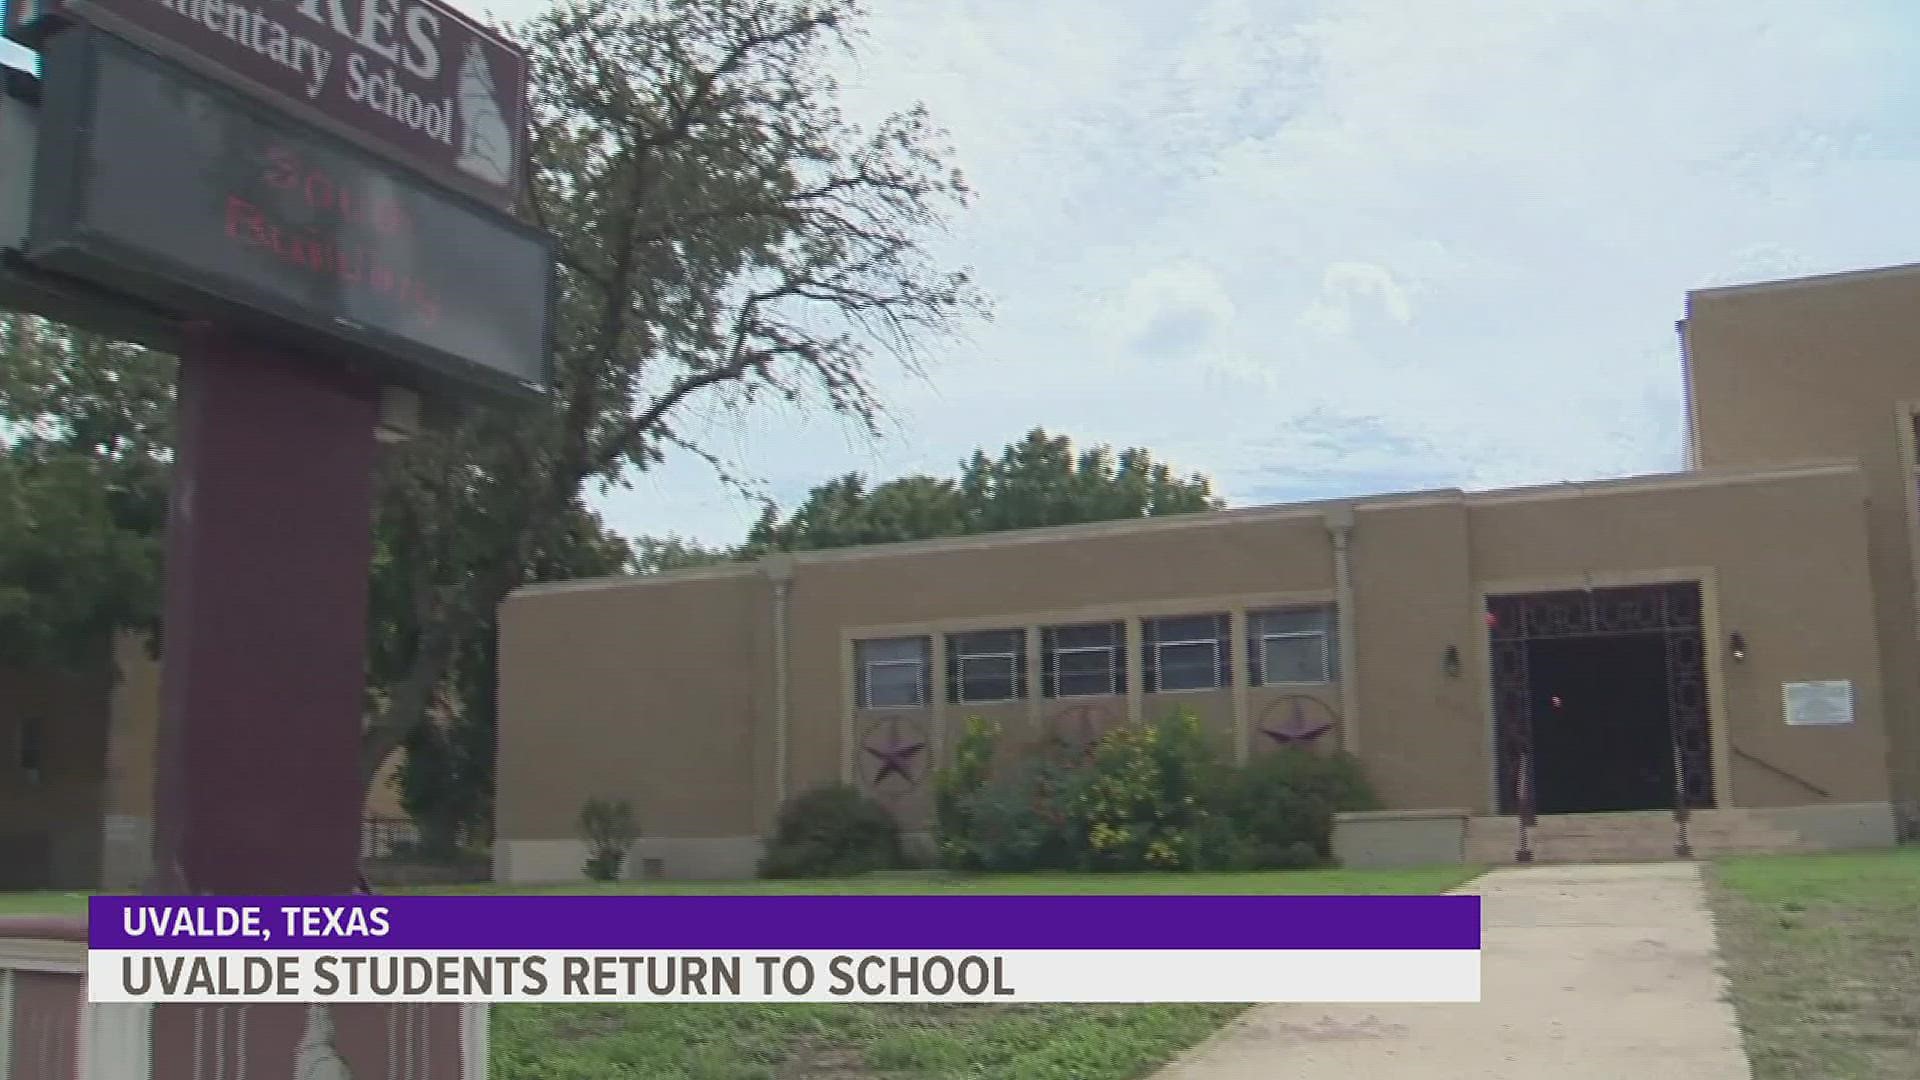 Although school has already started in parts of Texas, Uvalde schools have delayed their reopening. Even with the delay, security measures aren't finished.